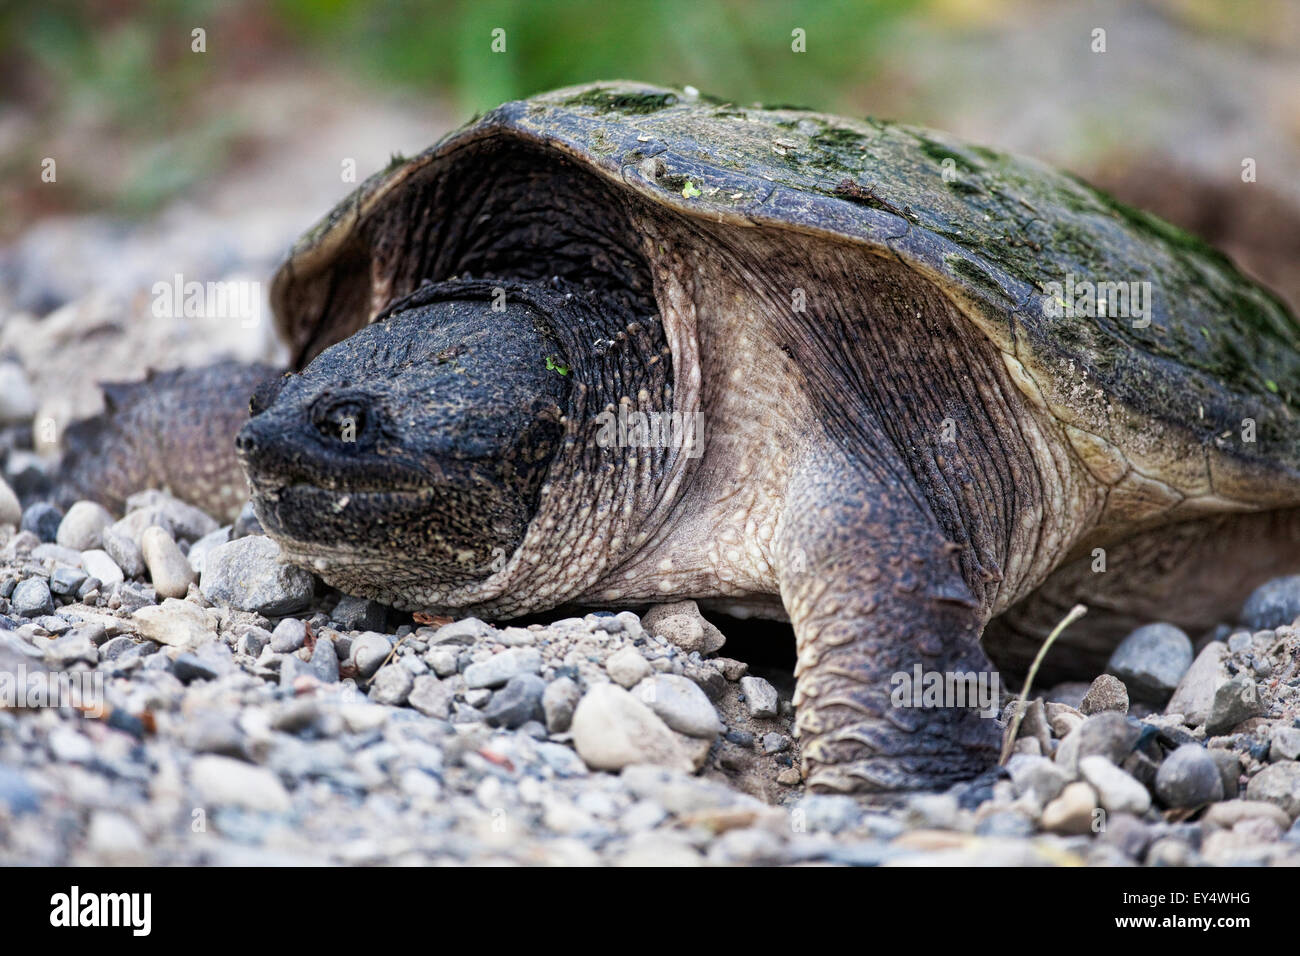 A Snapping Turtle, Chelydra serpentina, laying eggs Stock Photo